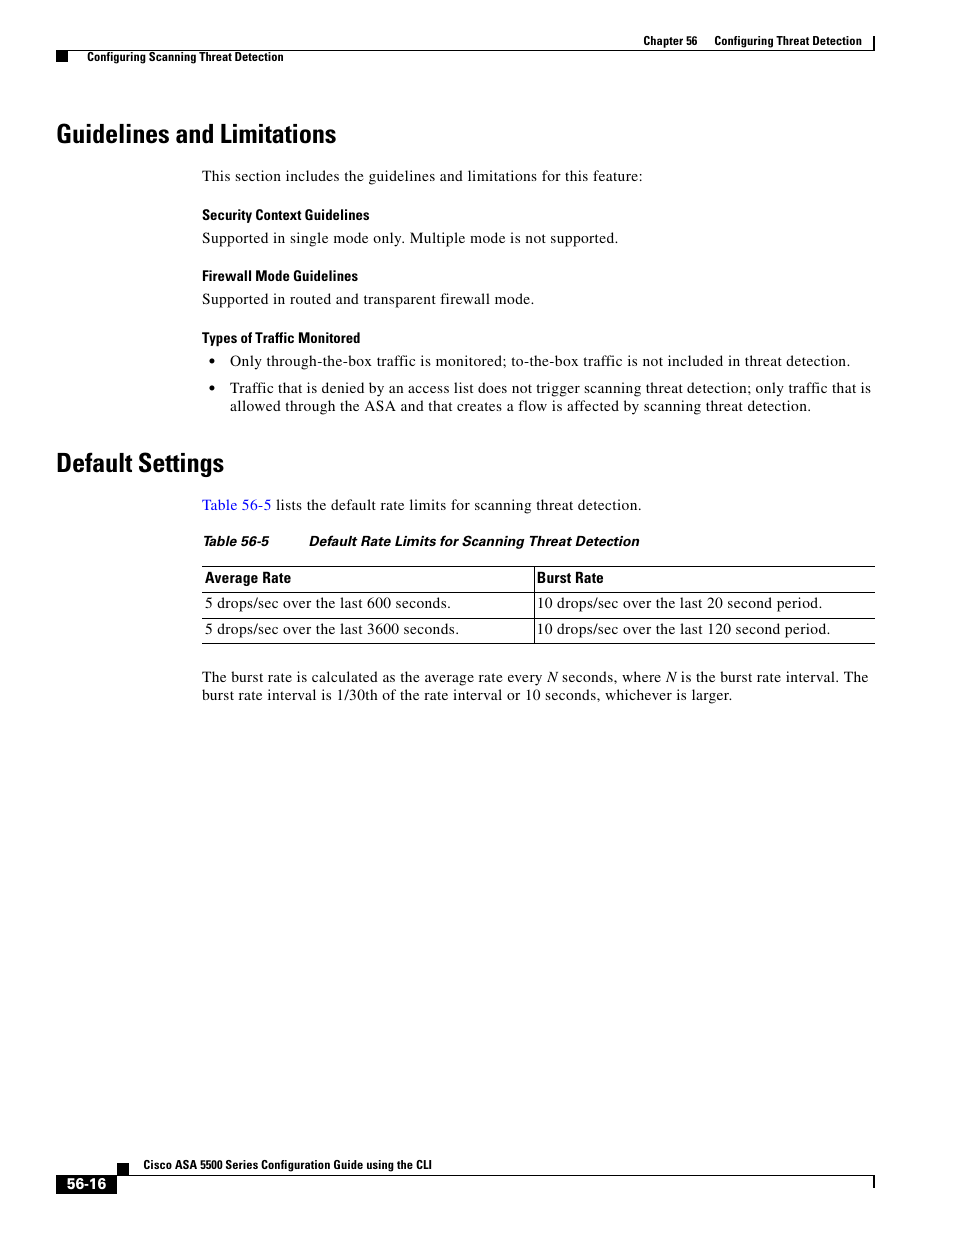 Guidelines and limitations, Default settings | Cisco ASA 5505 User Manual | Page 1202 / 1994